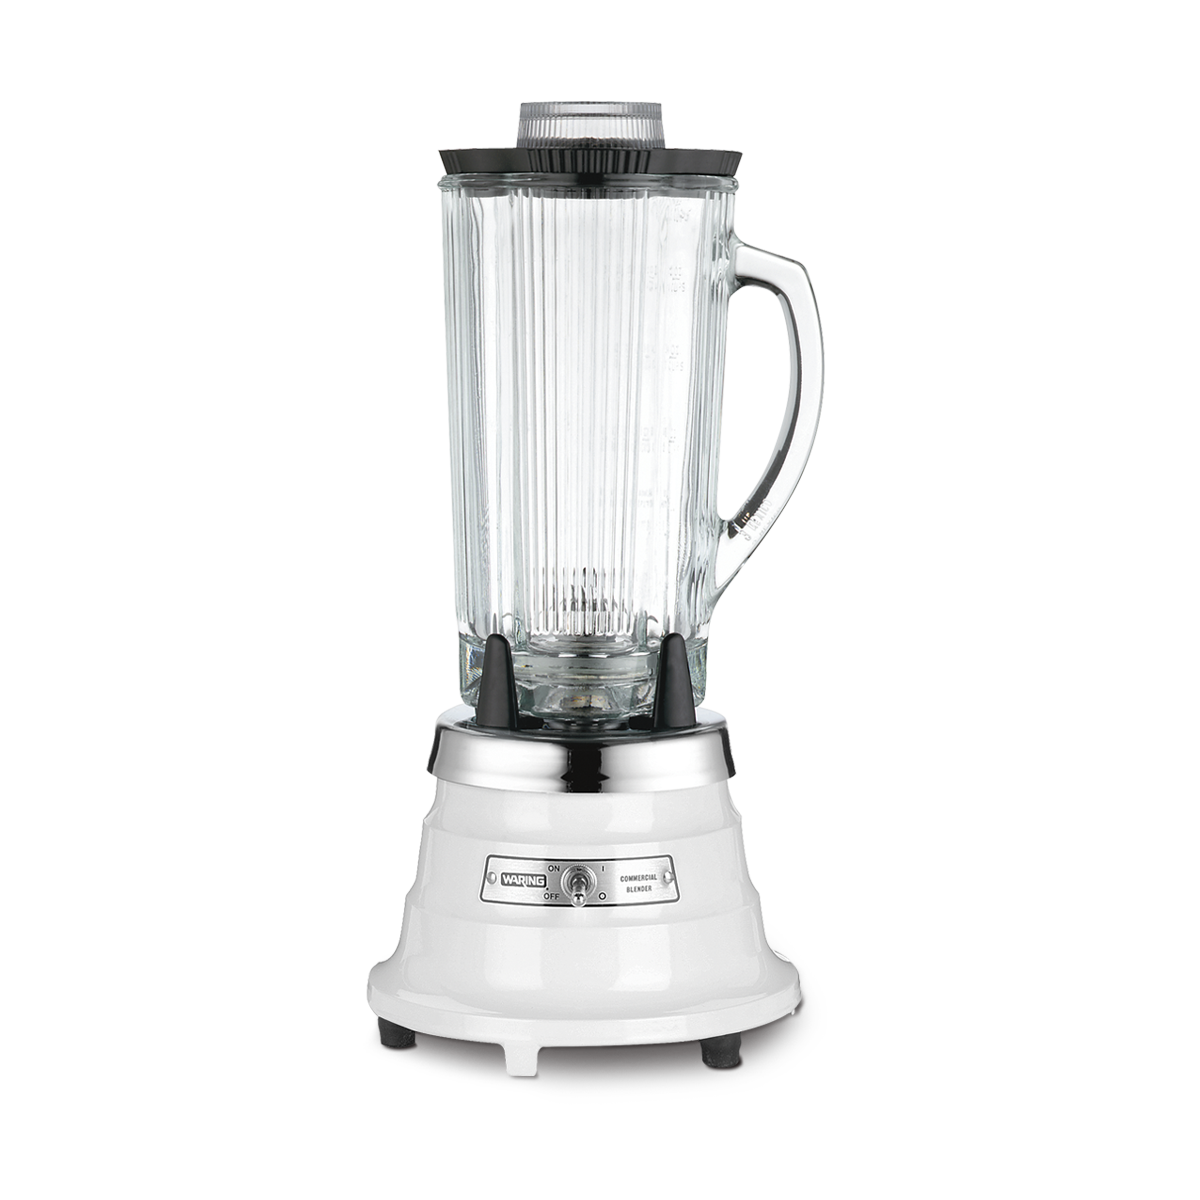 Conair™ Waring™ Laboratory Blenders: Two Speeds, Commercial